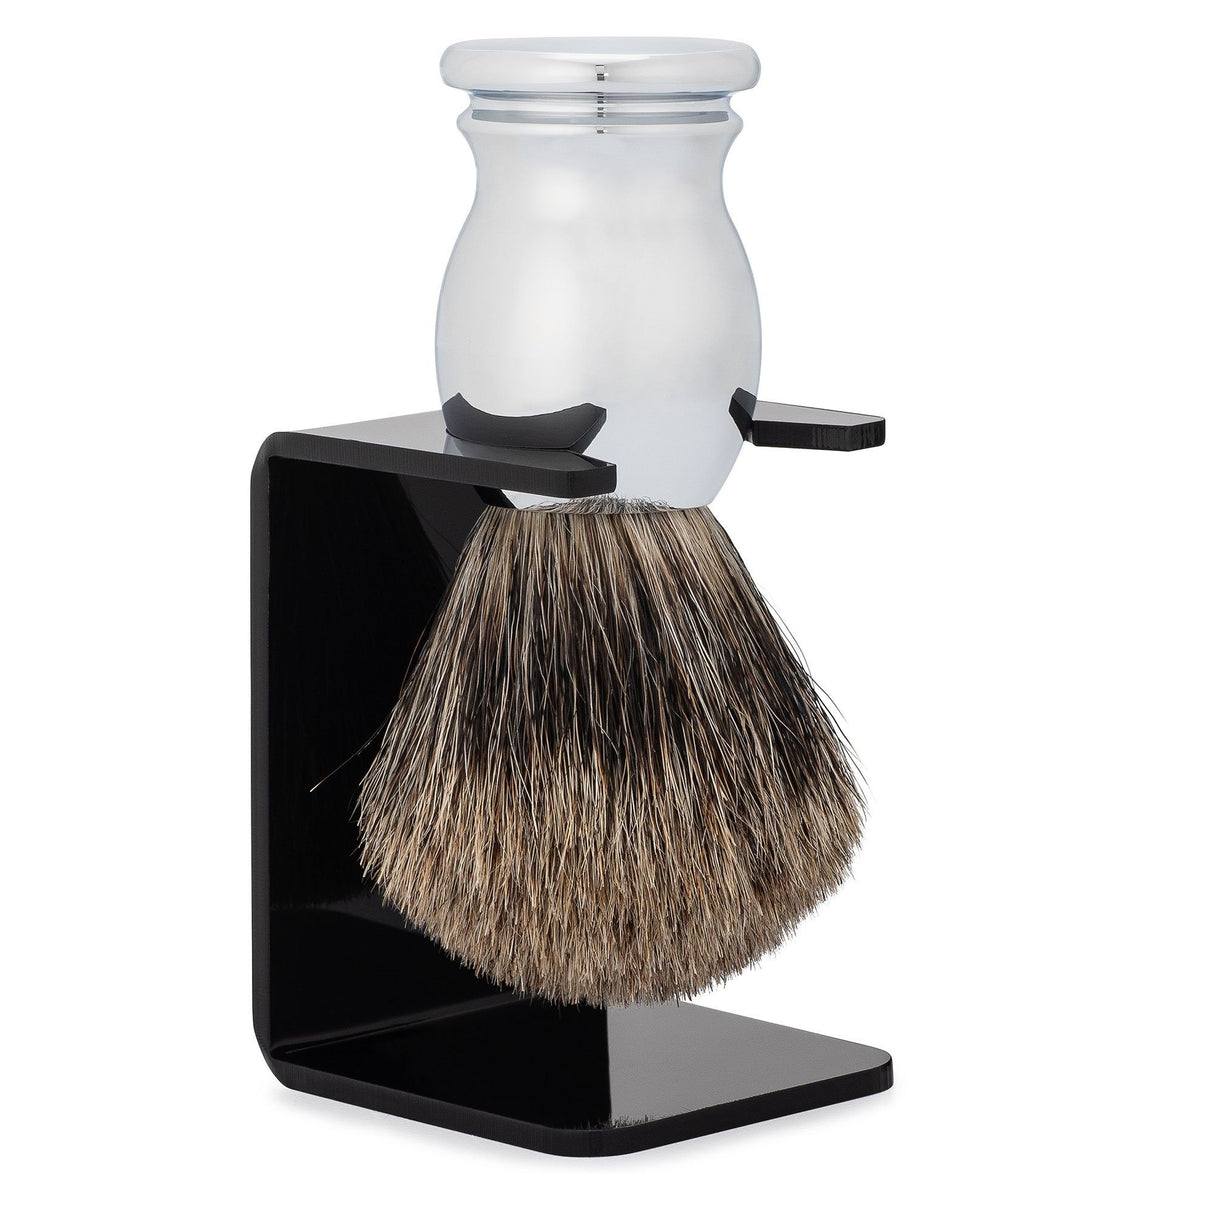 Mountaineer Brand SHAVE ACCESSORIES - Parker Shave Brush